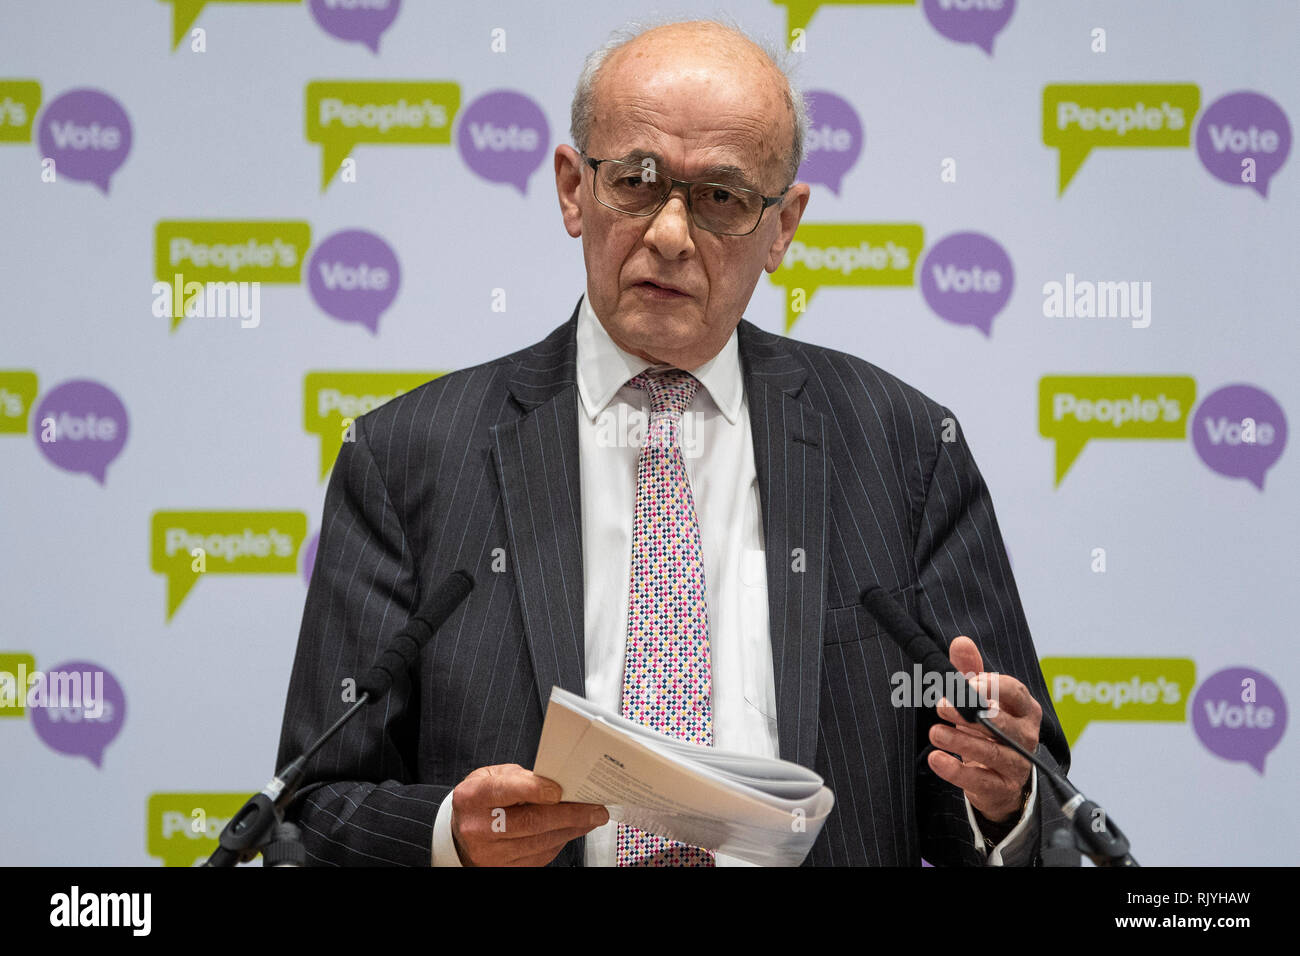 Lord Kerr at IET London at the launch of a new report from the People's Vote campaign showing how the Blindfold Brexit being supported by both Theresa May and Jeremy Corbyn offers no clarity and so brings no closure to the Brexit debate. Stock Photo